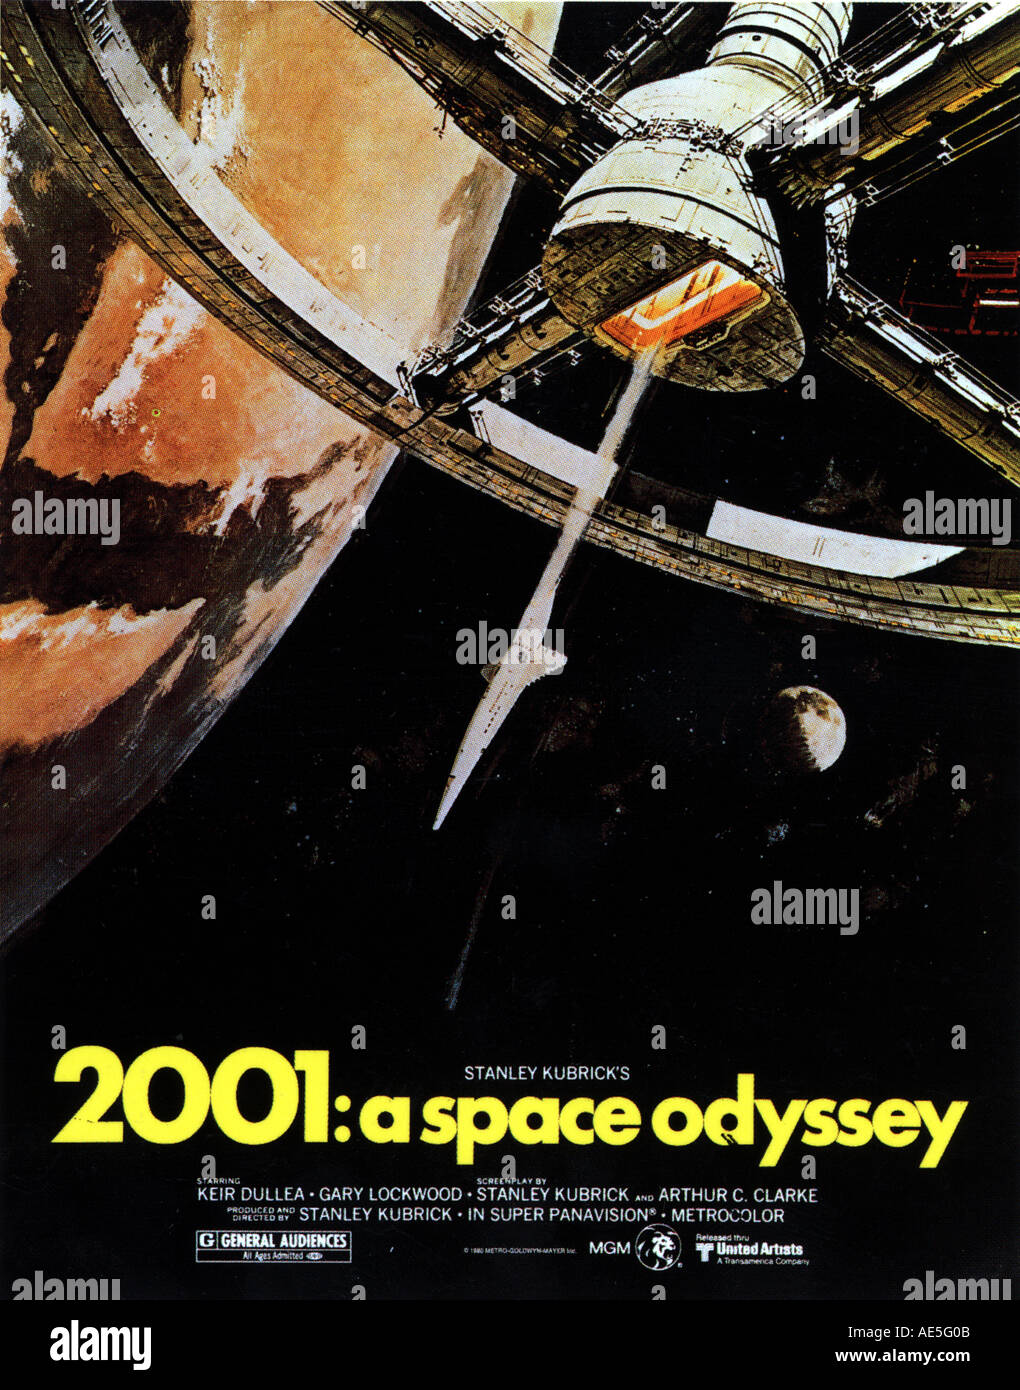 2001 A Space Odyssey Poster